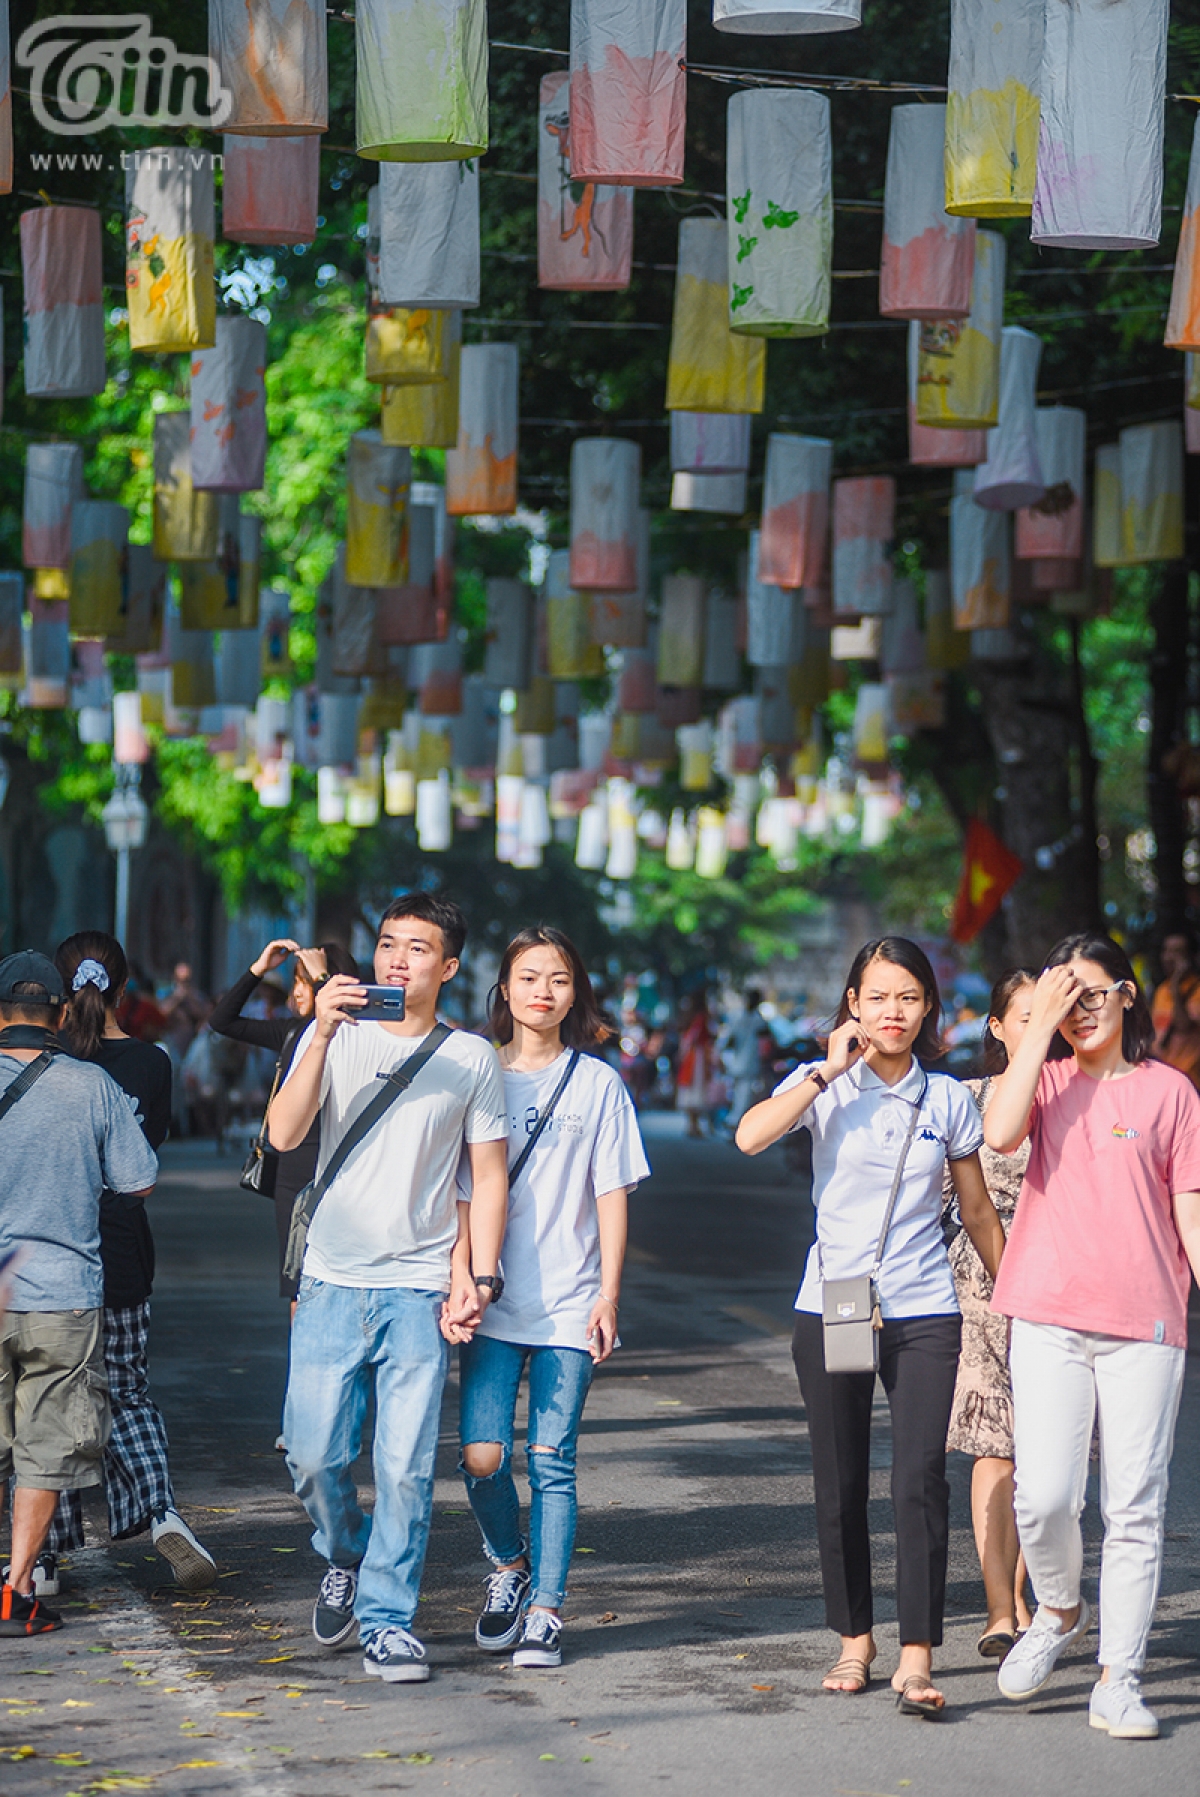 Youths enjoy going there to capture beautiful sights from the street and appreciate the colourful lanterns on show.